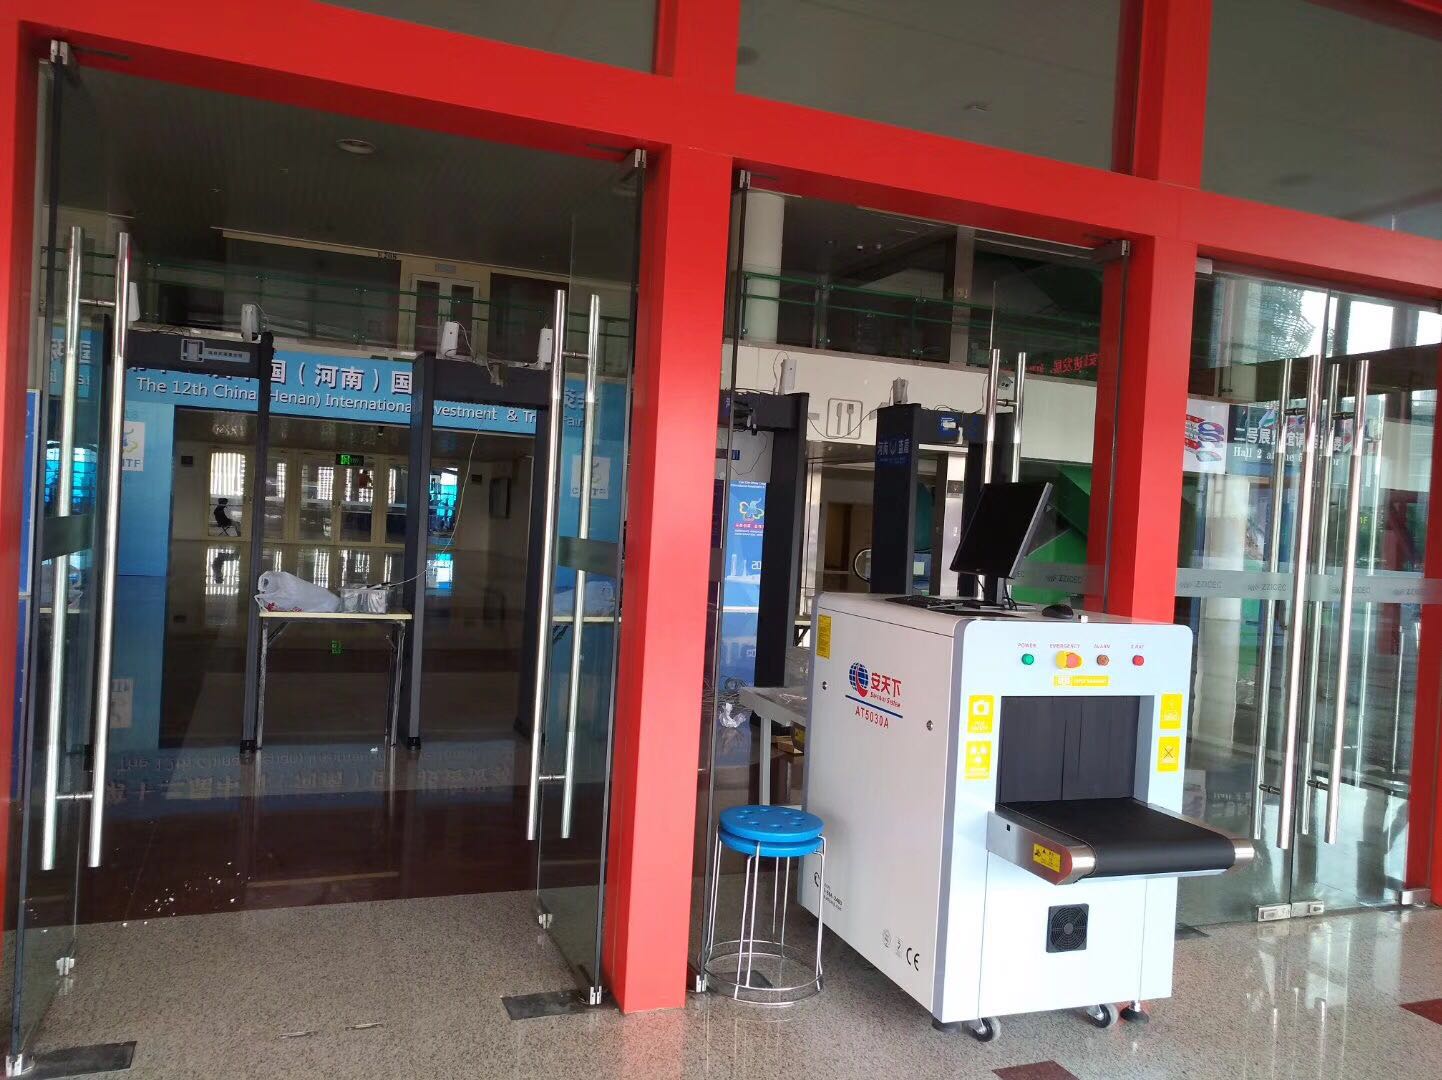 Security X-Ray Scanning Machine for Airport, Hotel, Embassy, Hospital,school